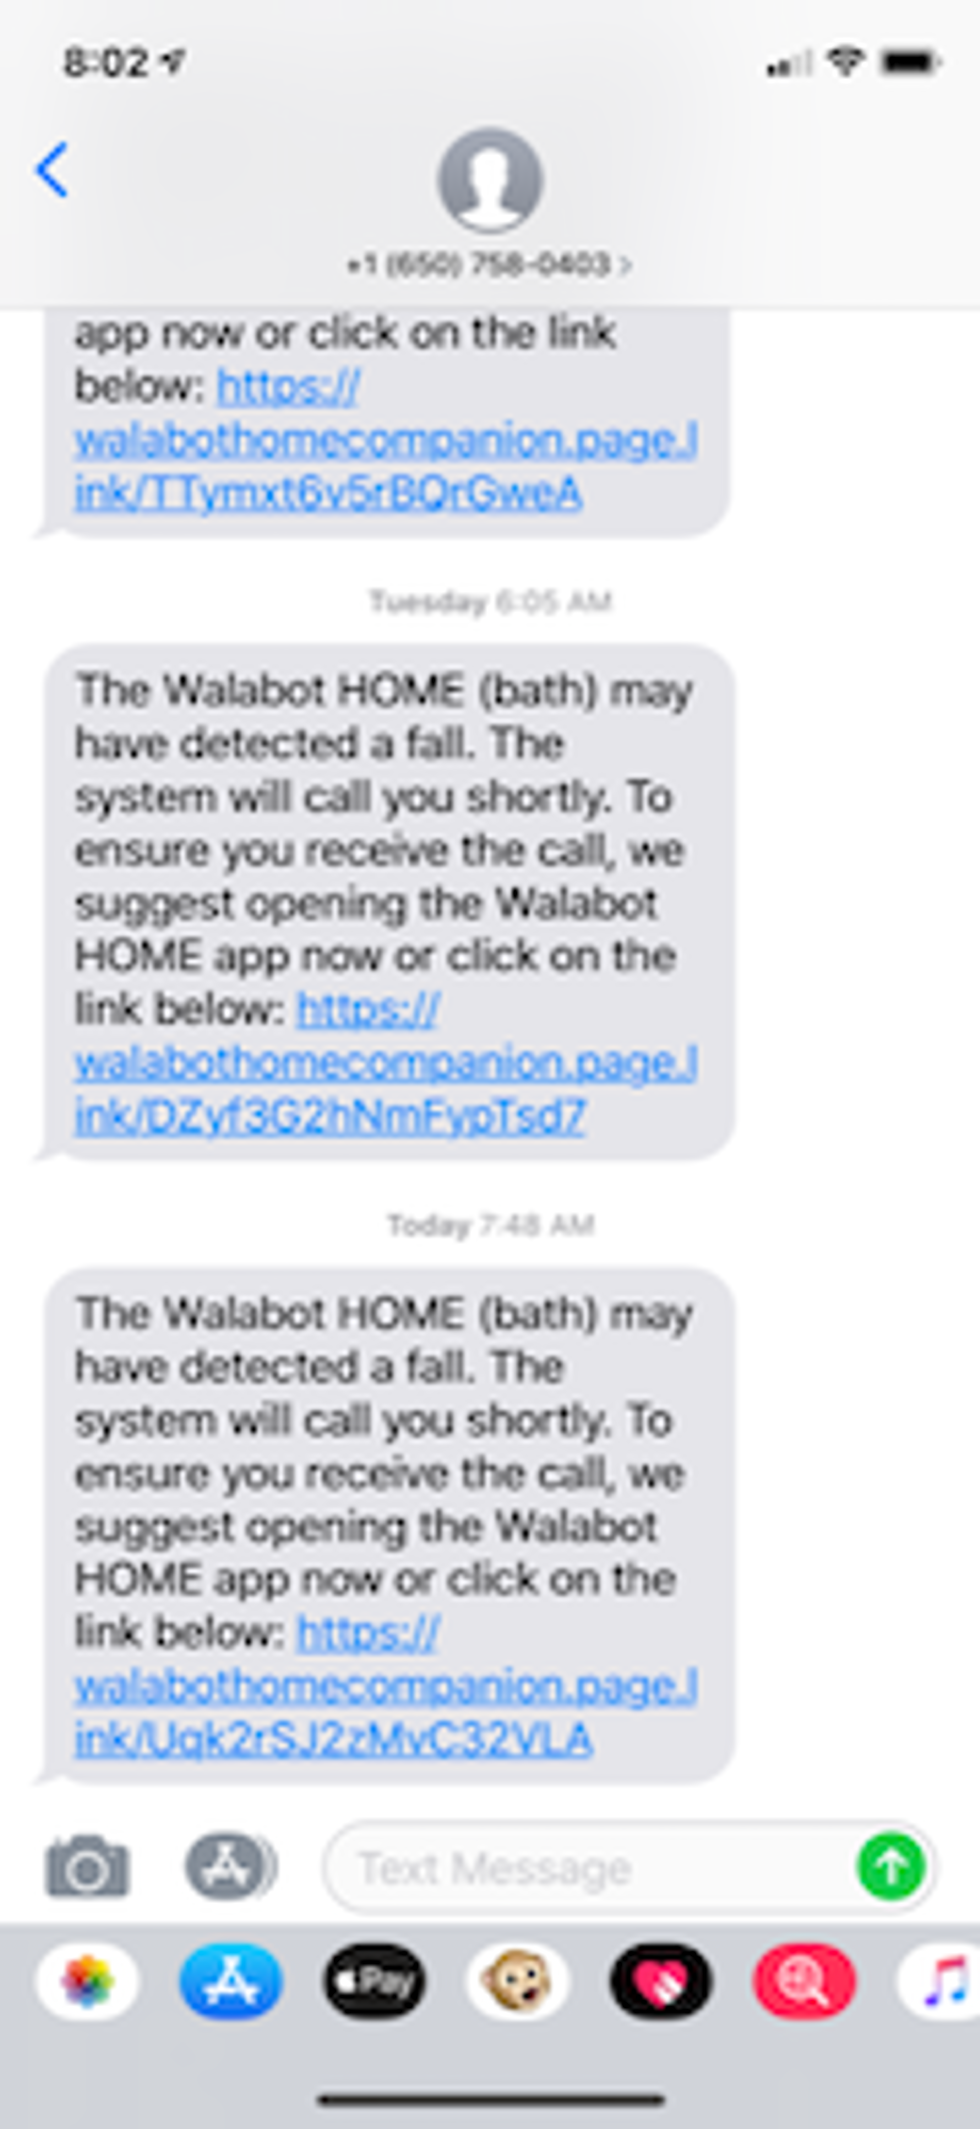 A text message sent telling a friend or family member that a fall has been detected by the Walabot Home